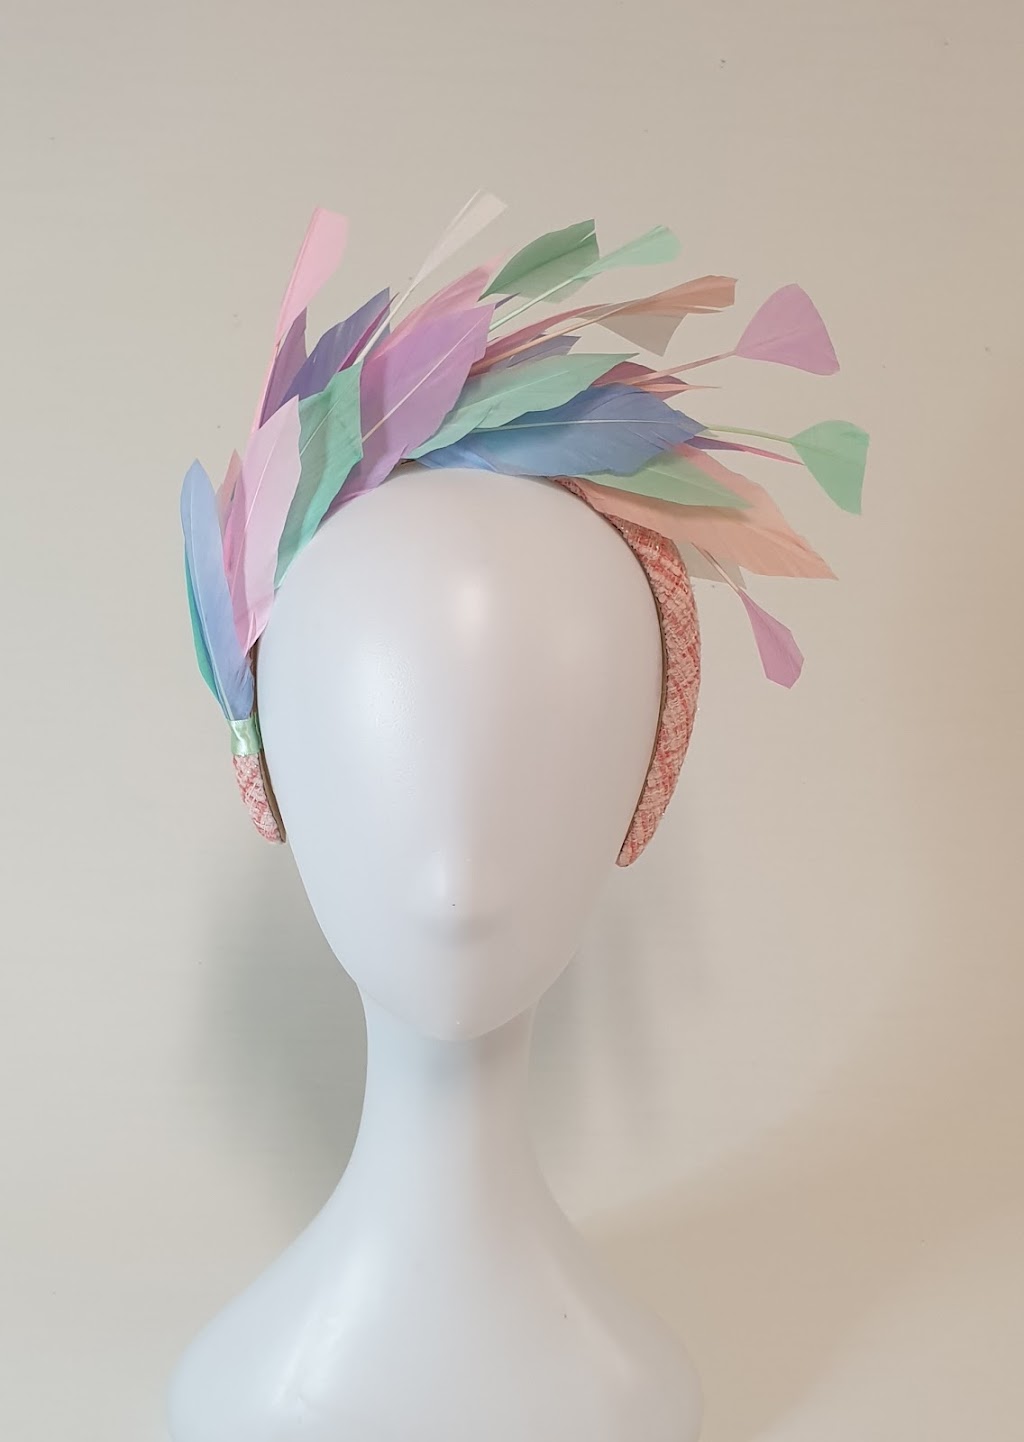 Designs by Reg - Millinery | 3 William St, Boonah QLD 4310, Australia | Phone: 0408 354 729